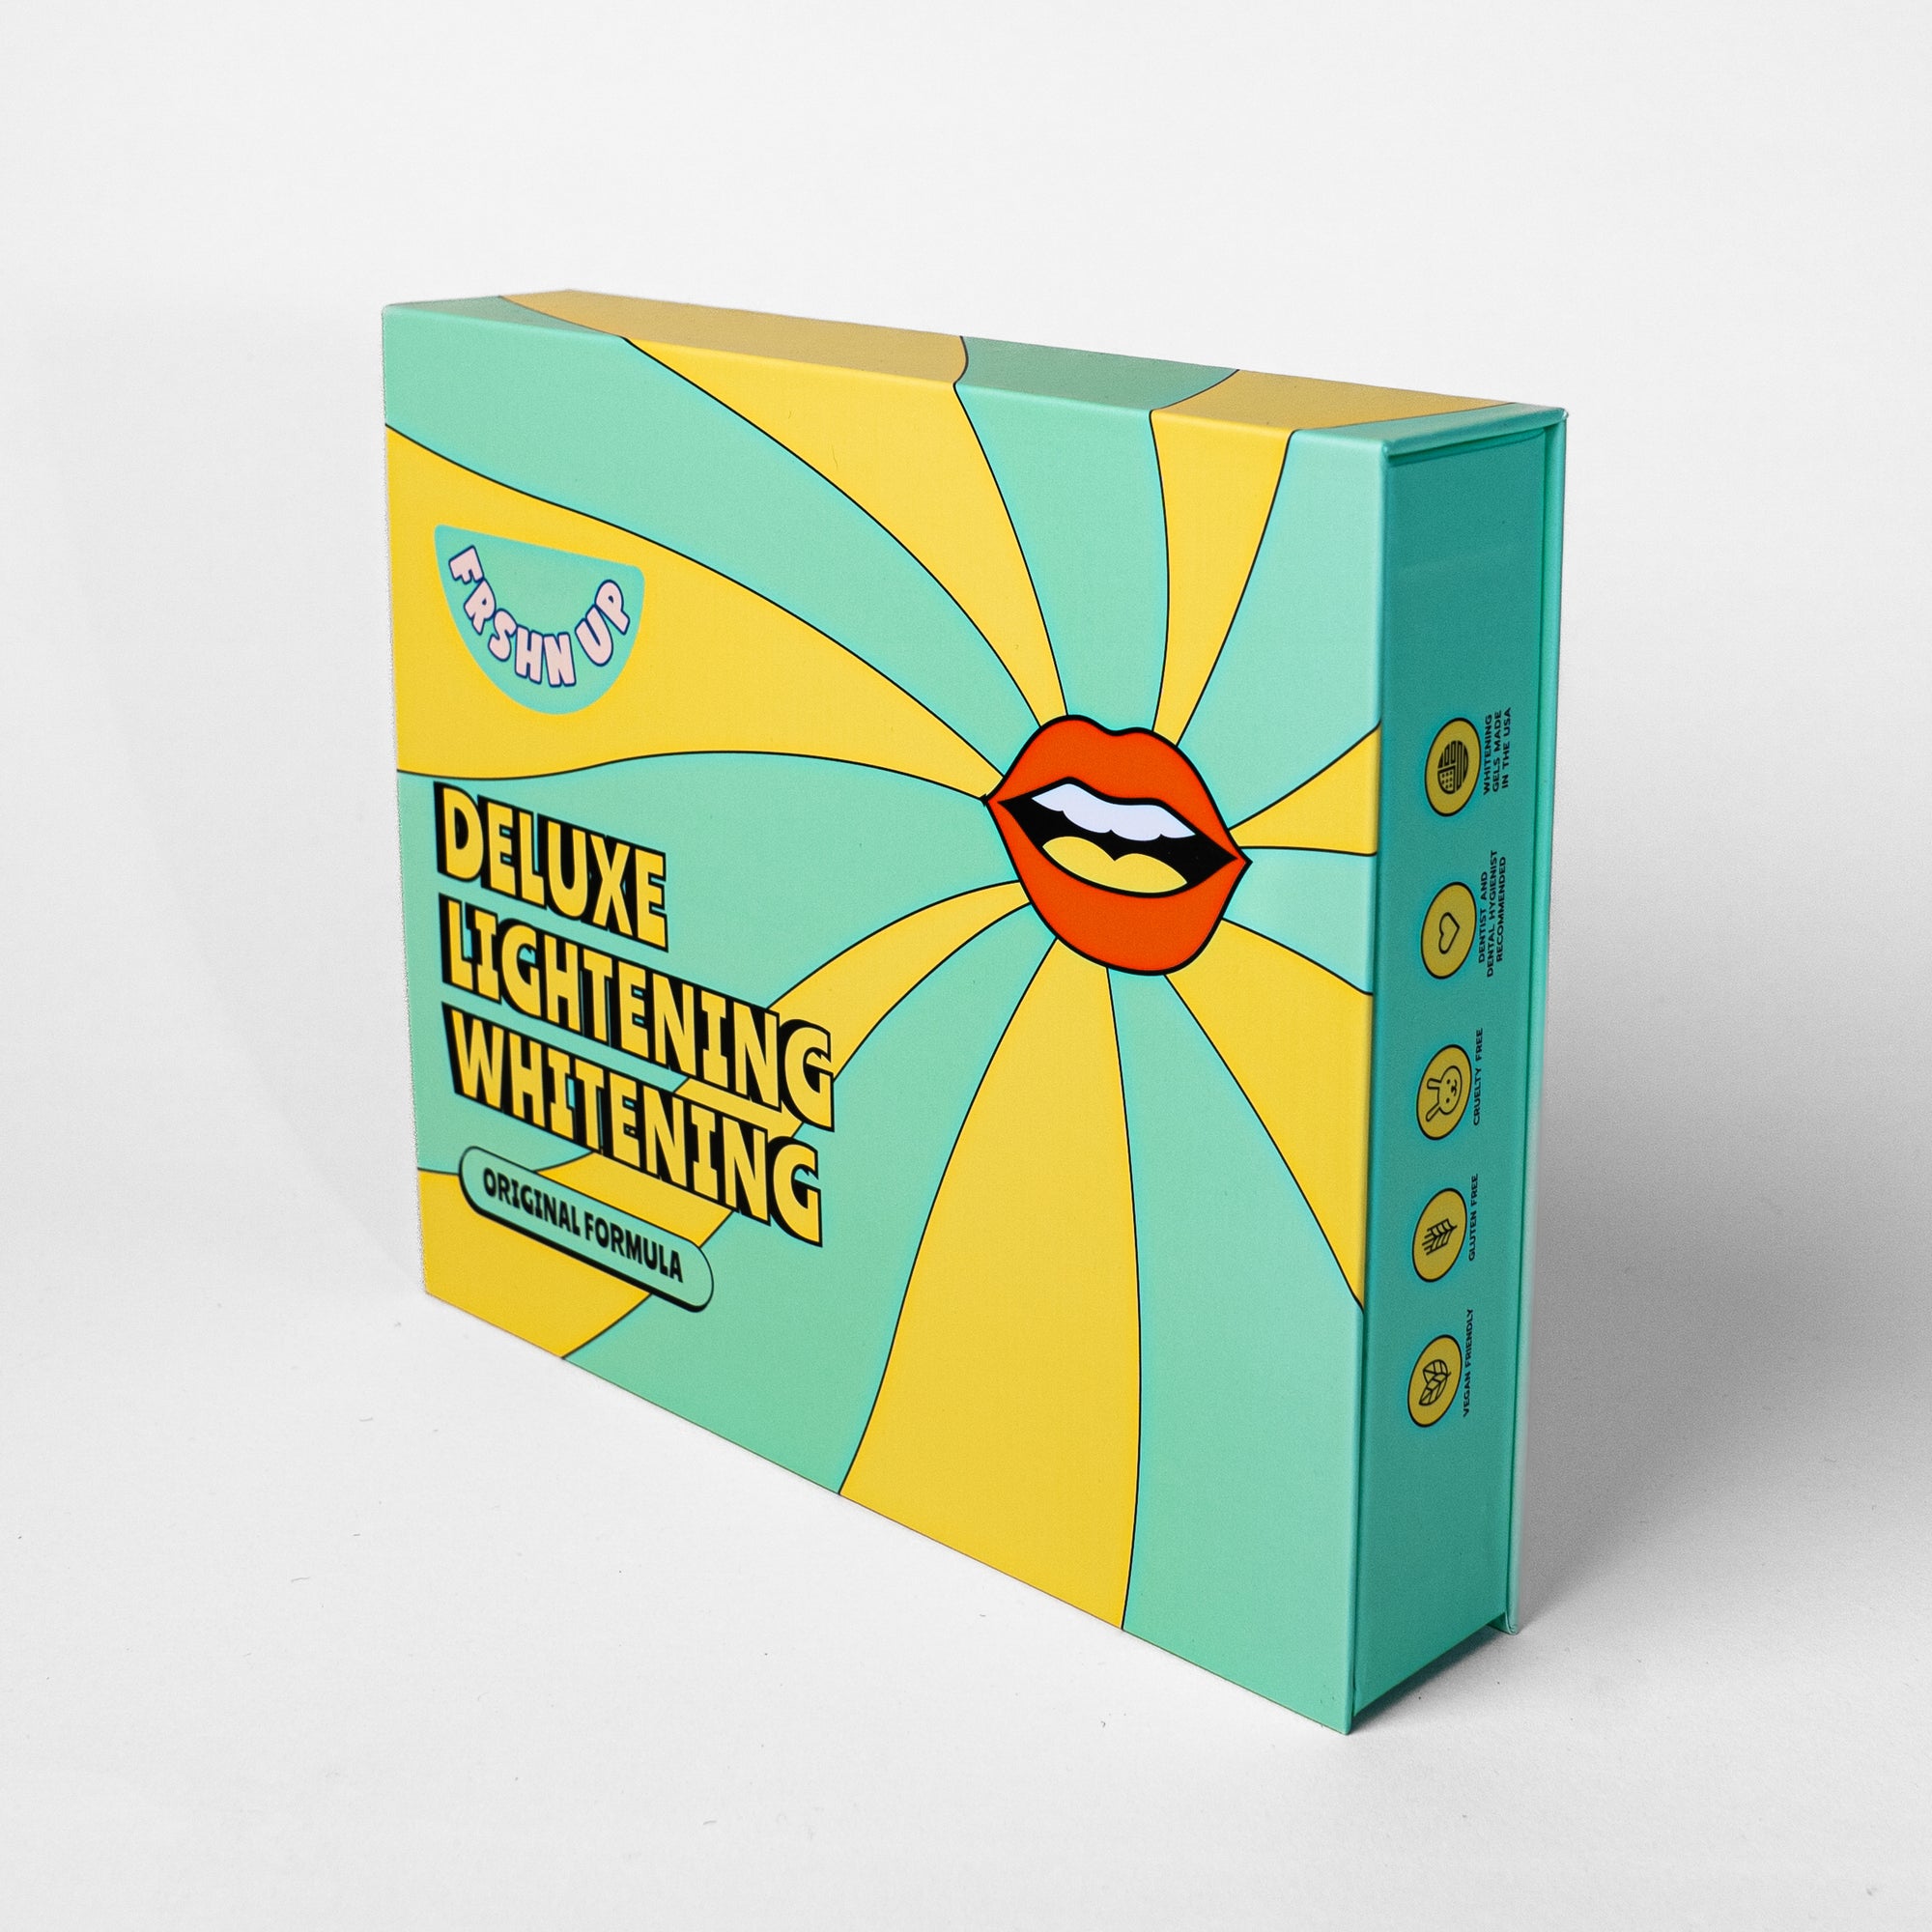 A FRSHN UP Deluxe Lightening Whitening Kit - Original Formula with a smiley face on it used for teeth whitening dentists.